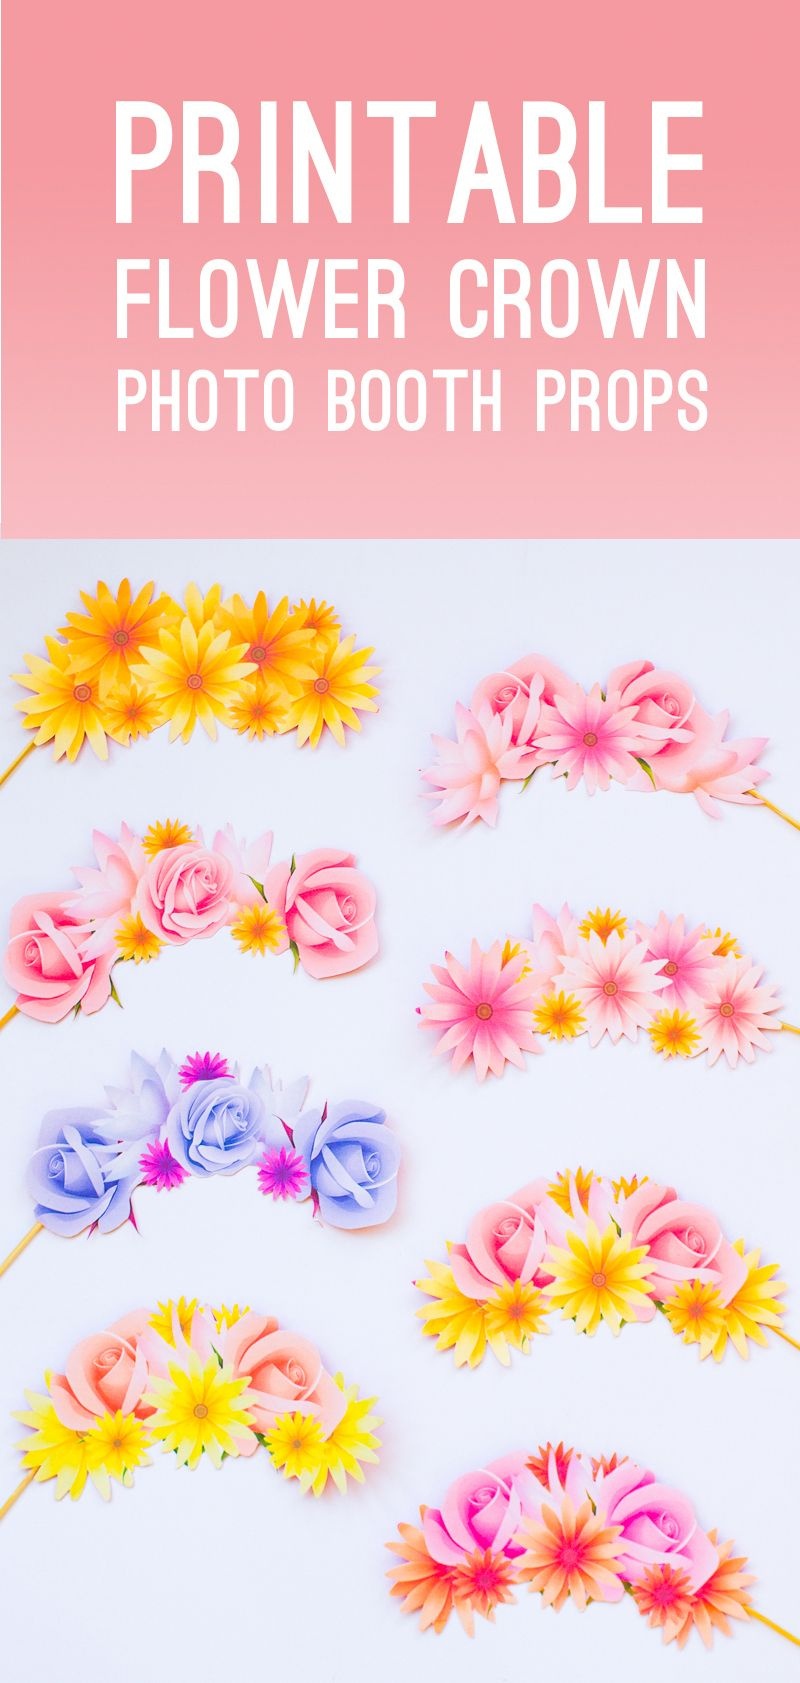 Free Printable Photo Booth Flower Crown Props For Your Wedding - Free Printable Photo Booth Props Bridal Shower